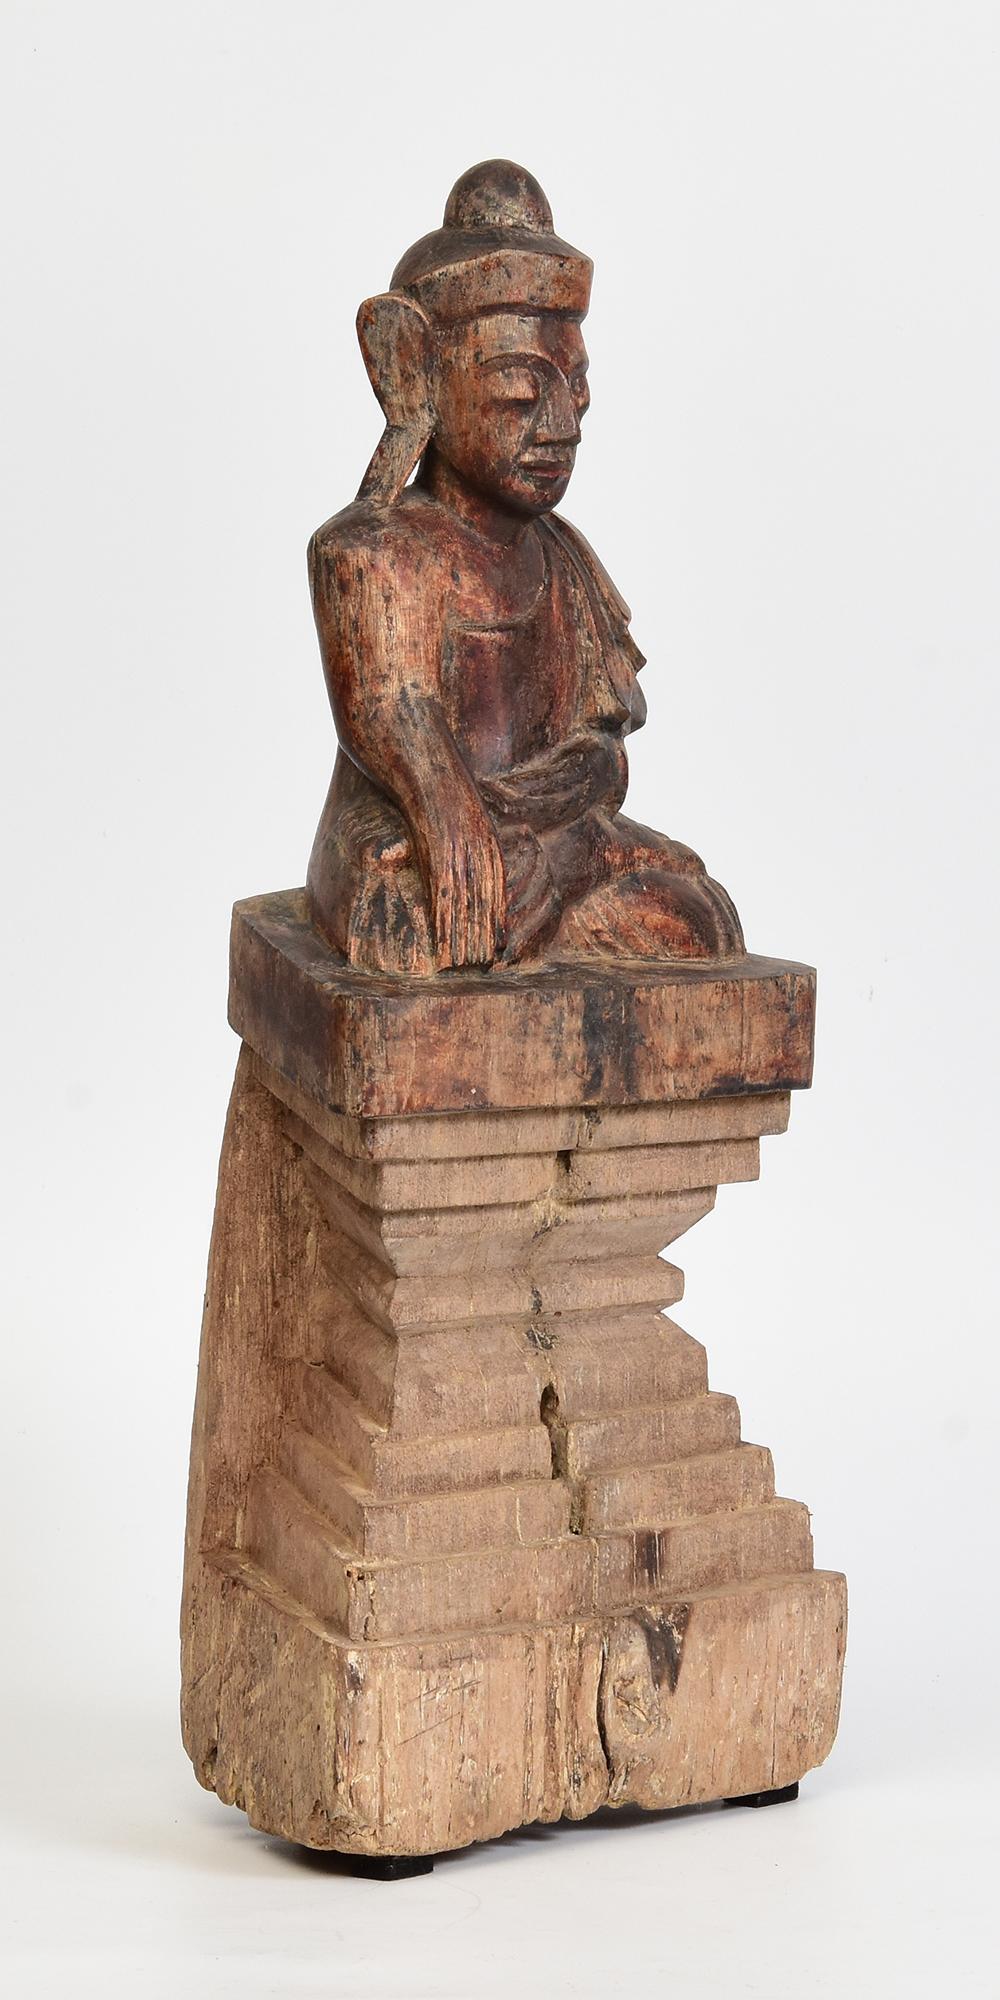 18th Century, Shan, Antique Burmese Wooden Seated Buddha For Sale 6